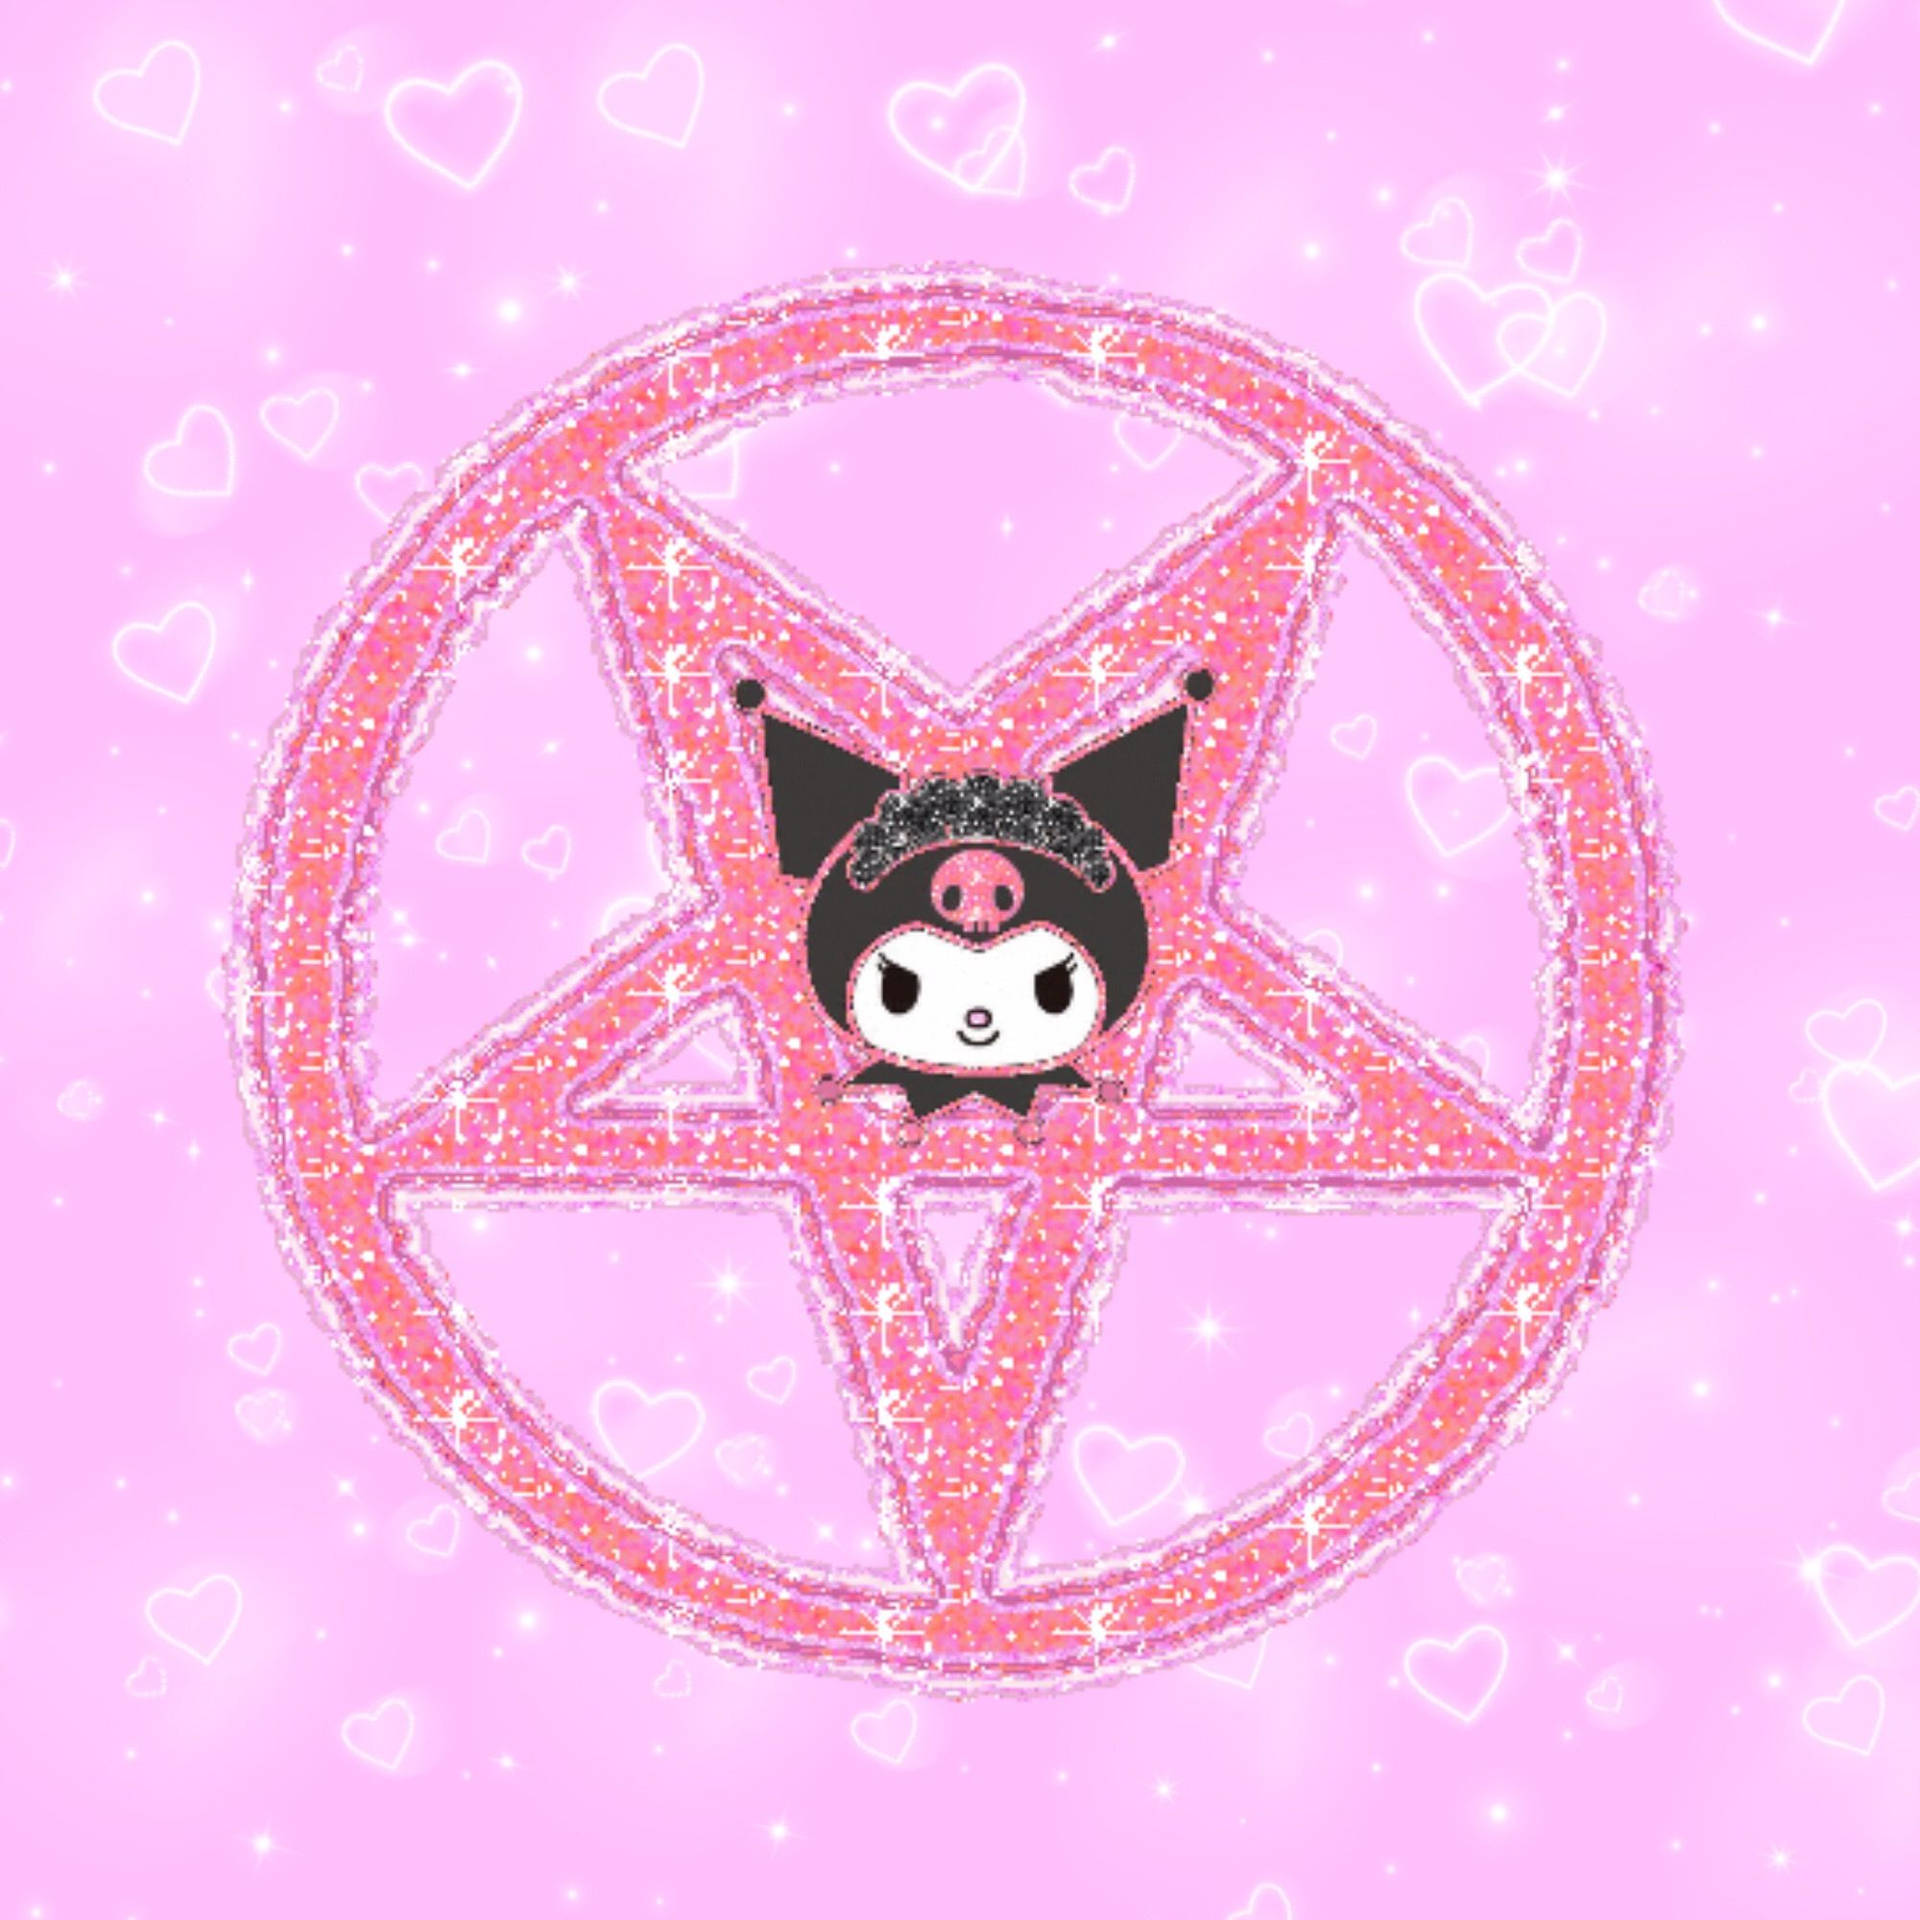 Pastel Goth 2000X2000 Wallpaper and Background Image